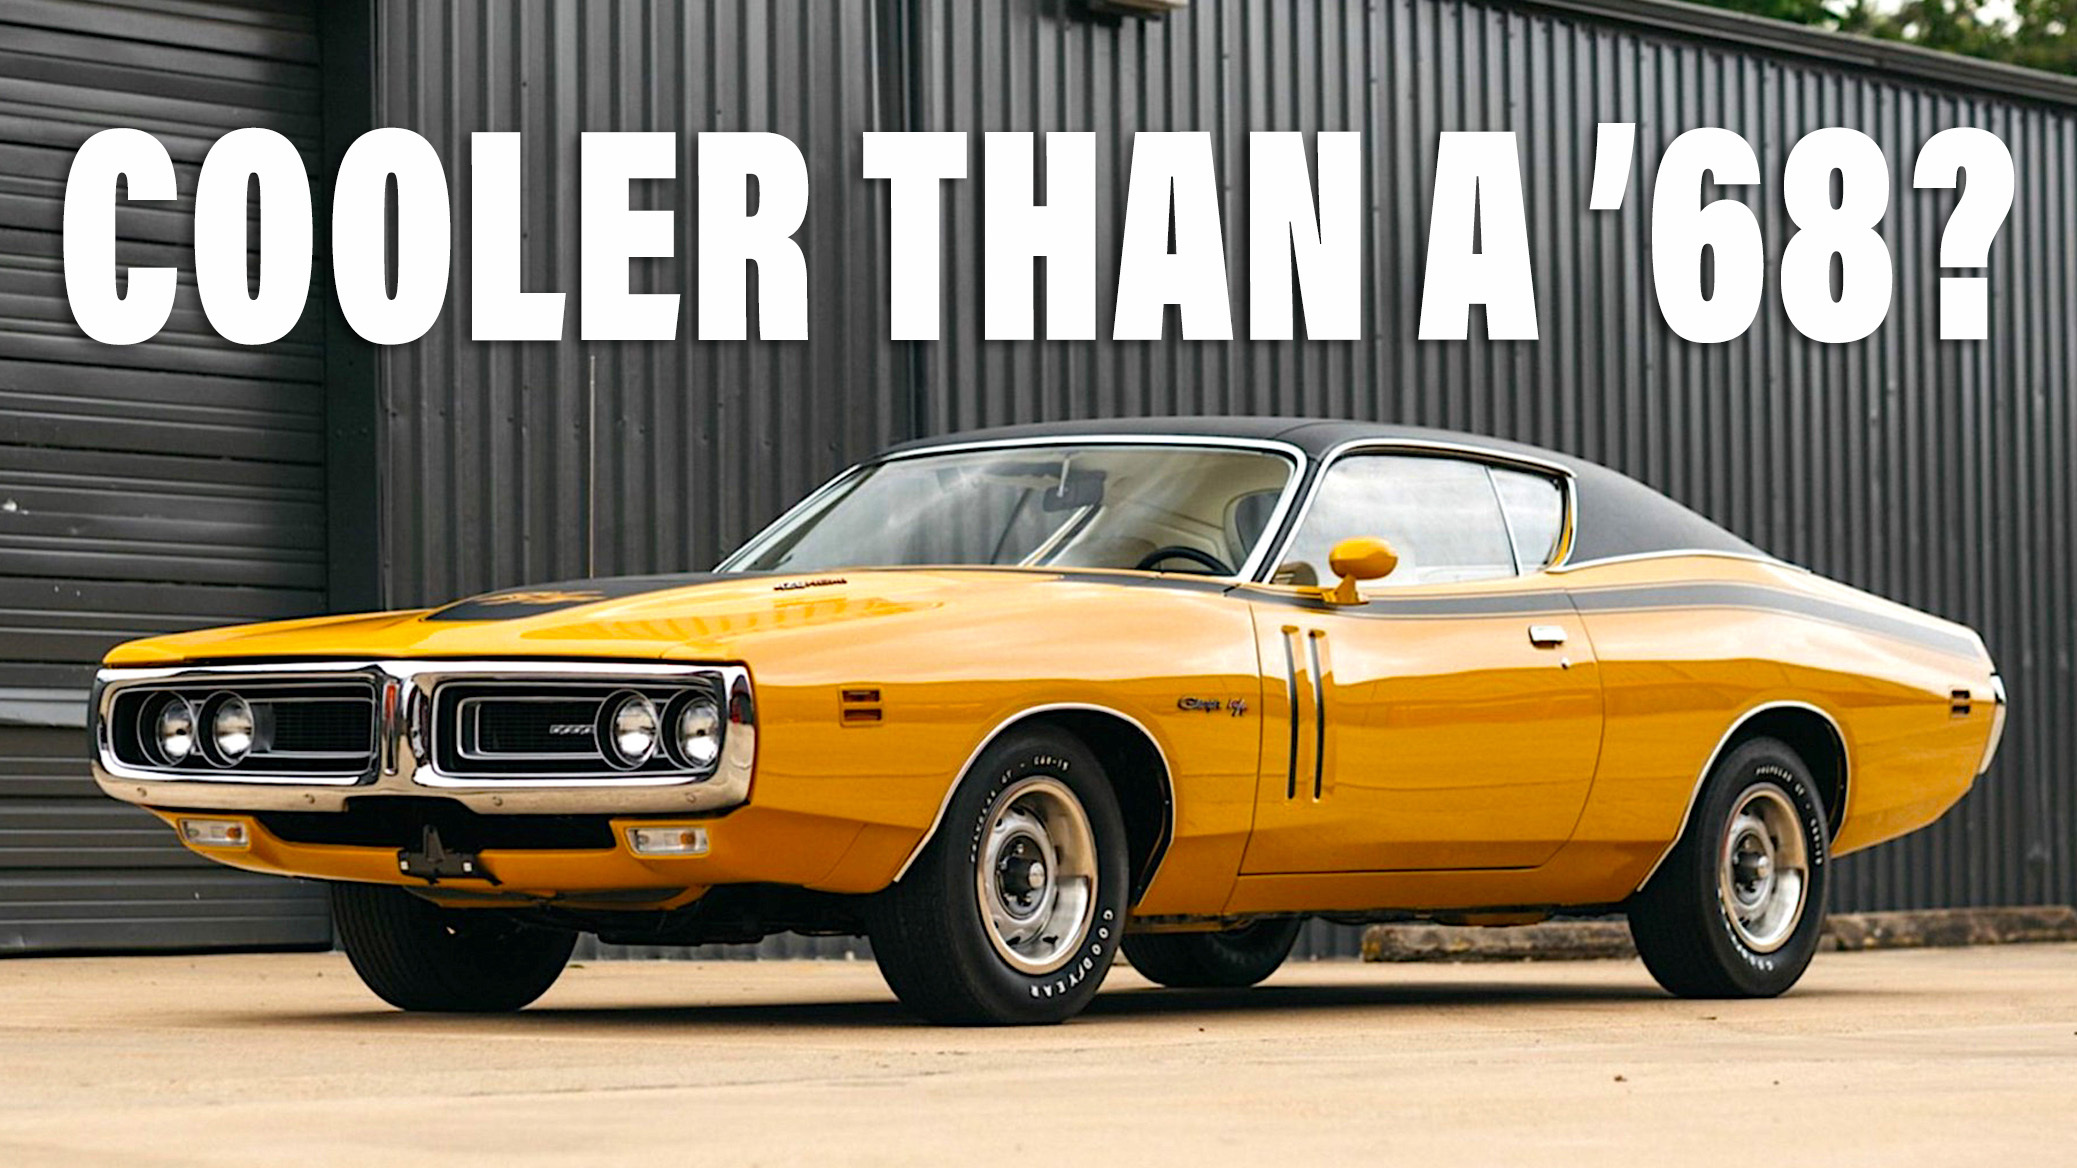 This 1971 Dodge Charger 426 Is One Of Only 63 Built In The Hemi's Final  Year | Carscoops